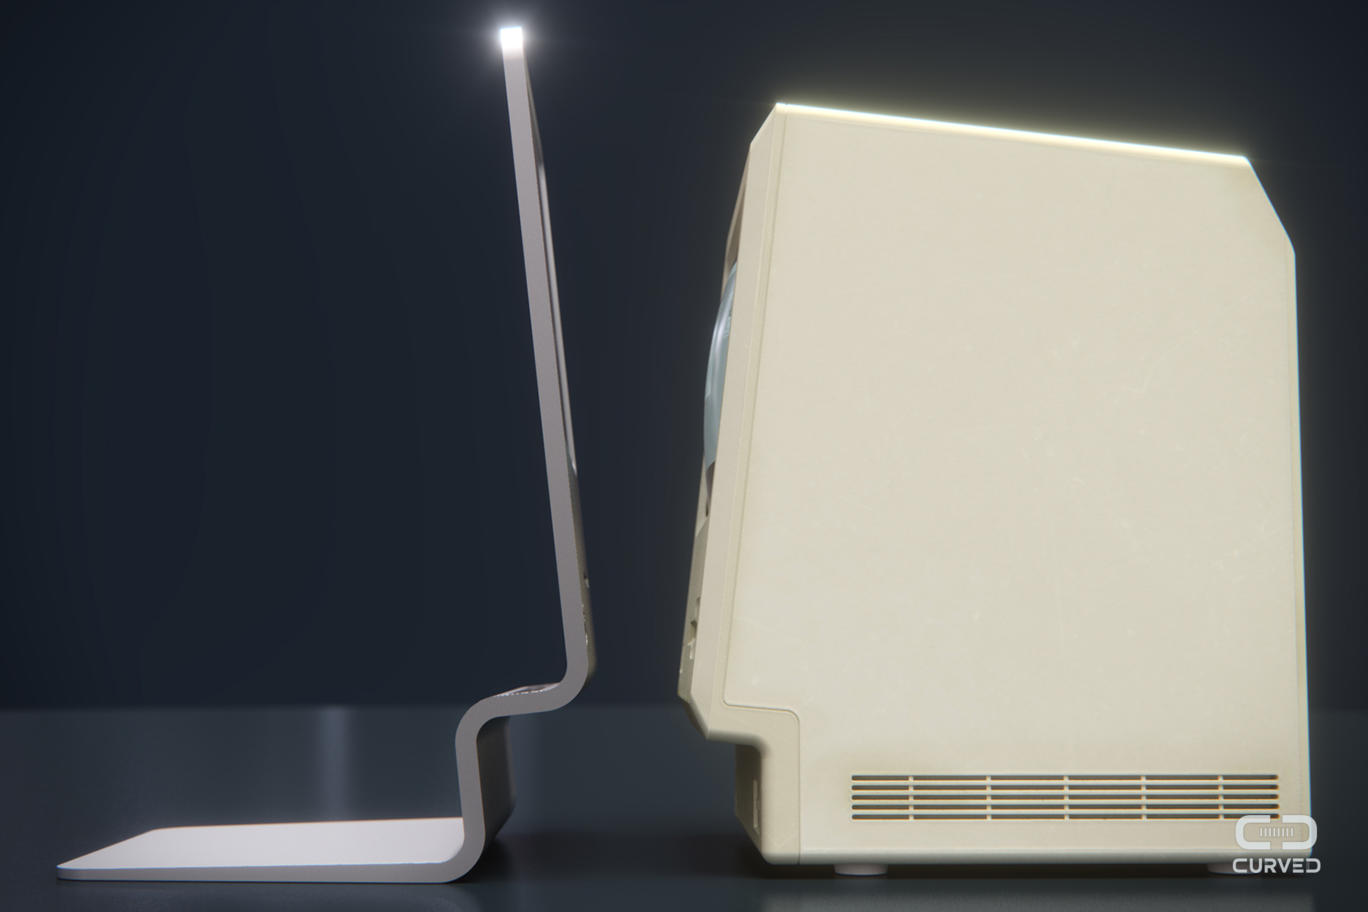 Curved Labs Mac Face to Face with Original Macintosh